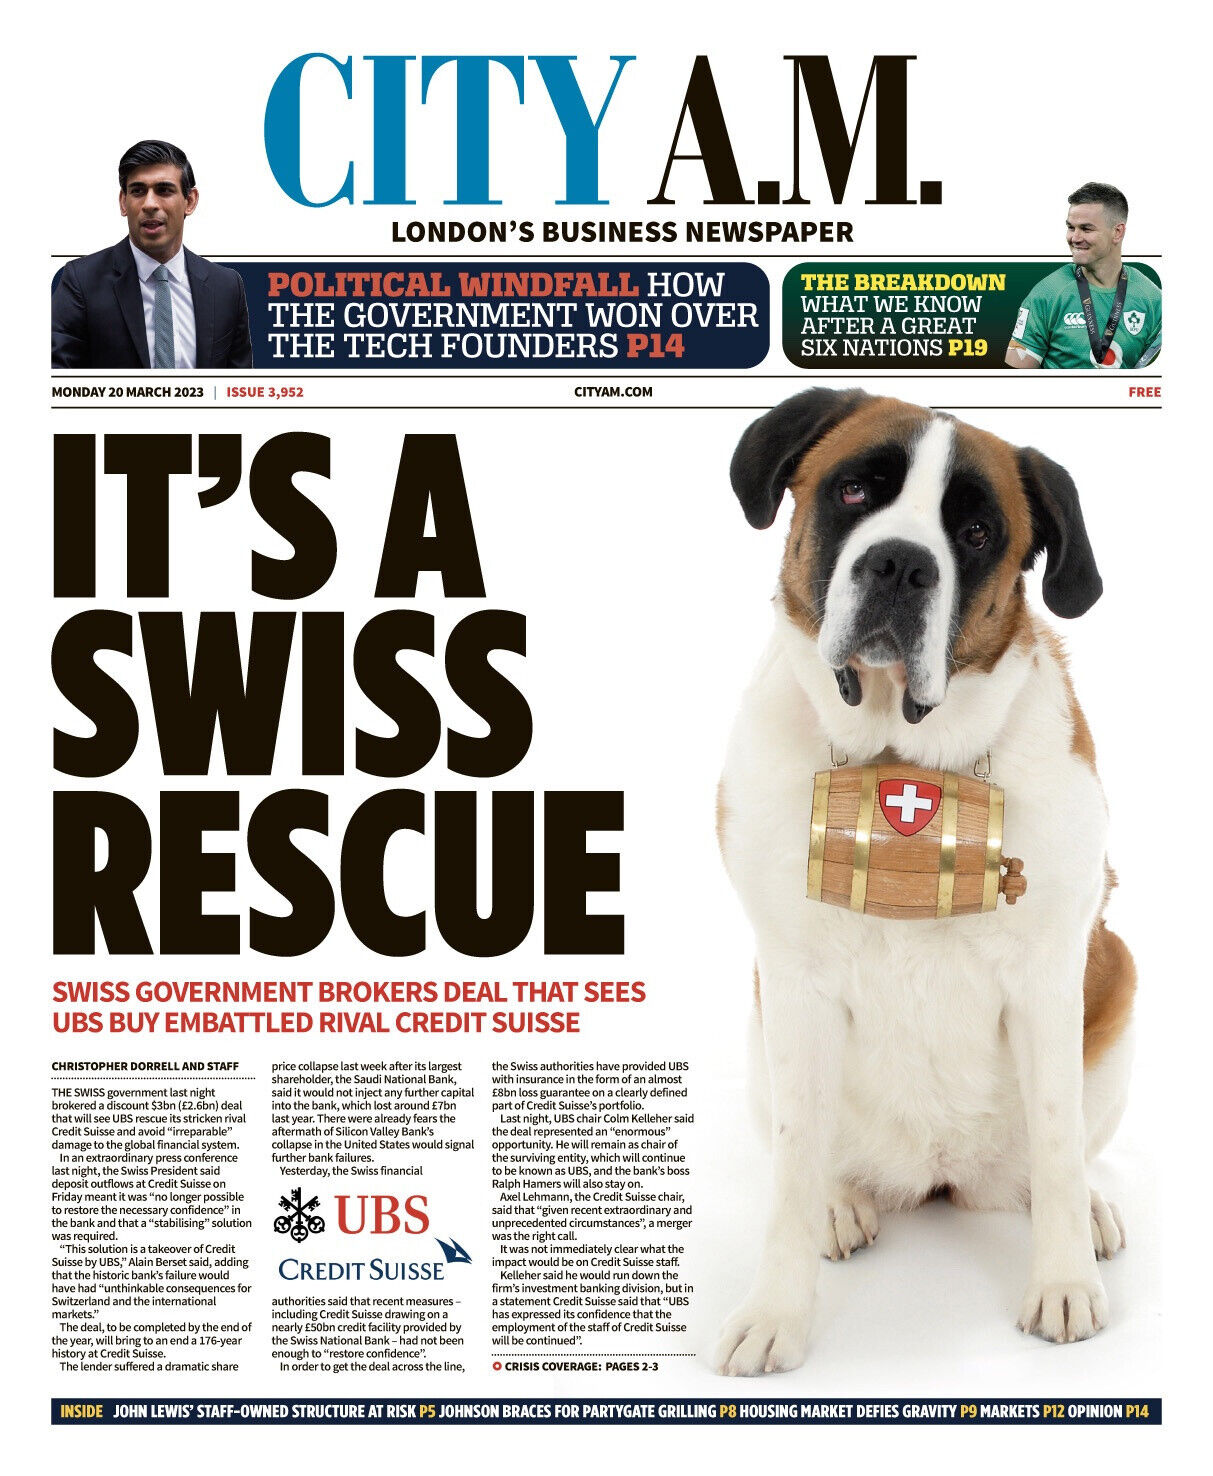 City AM Newspaper- UBS BUYS CREDIT SUISSE - SWISS BANKING CRISIS - 20 MARCH 2023